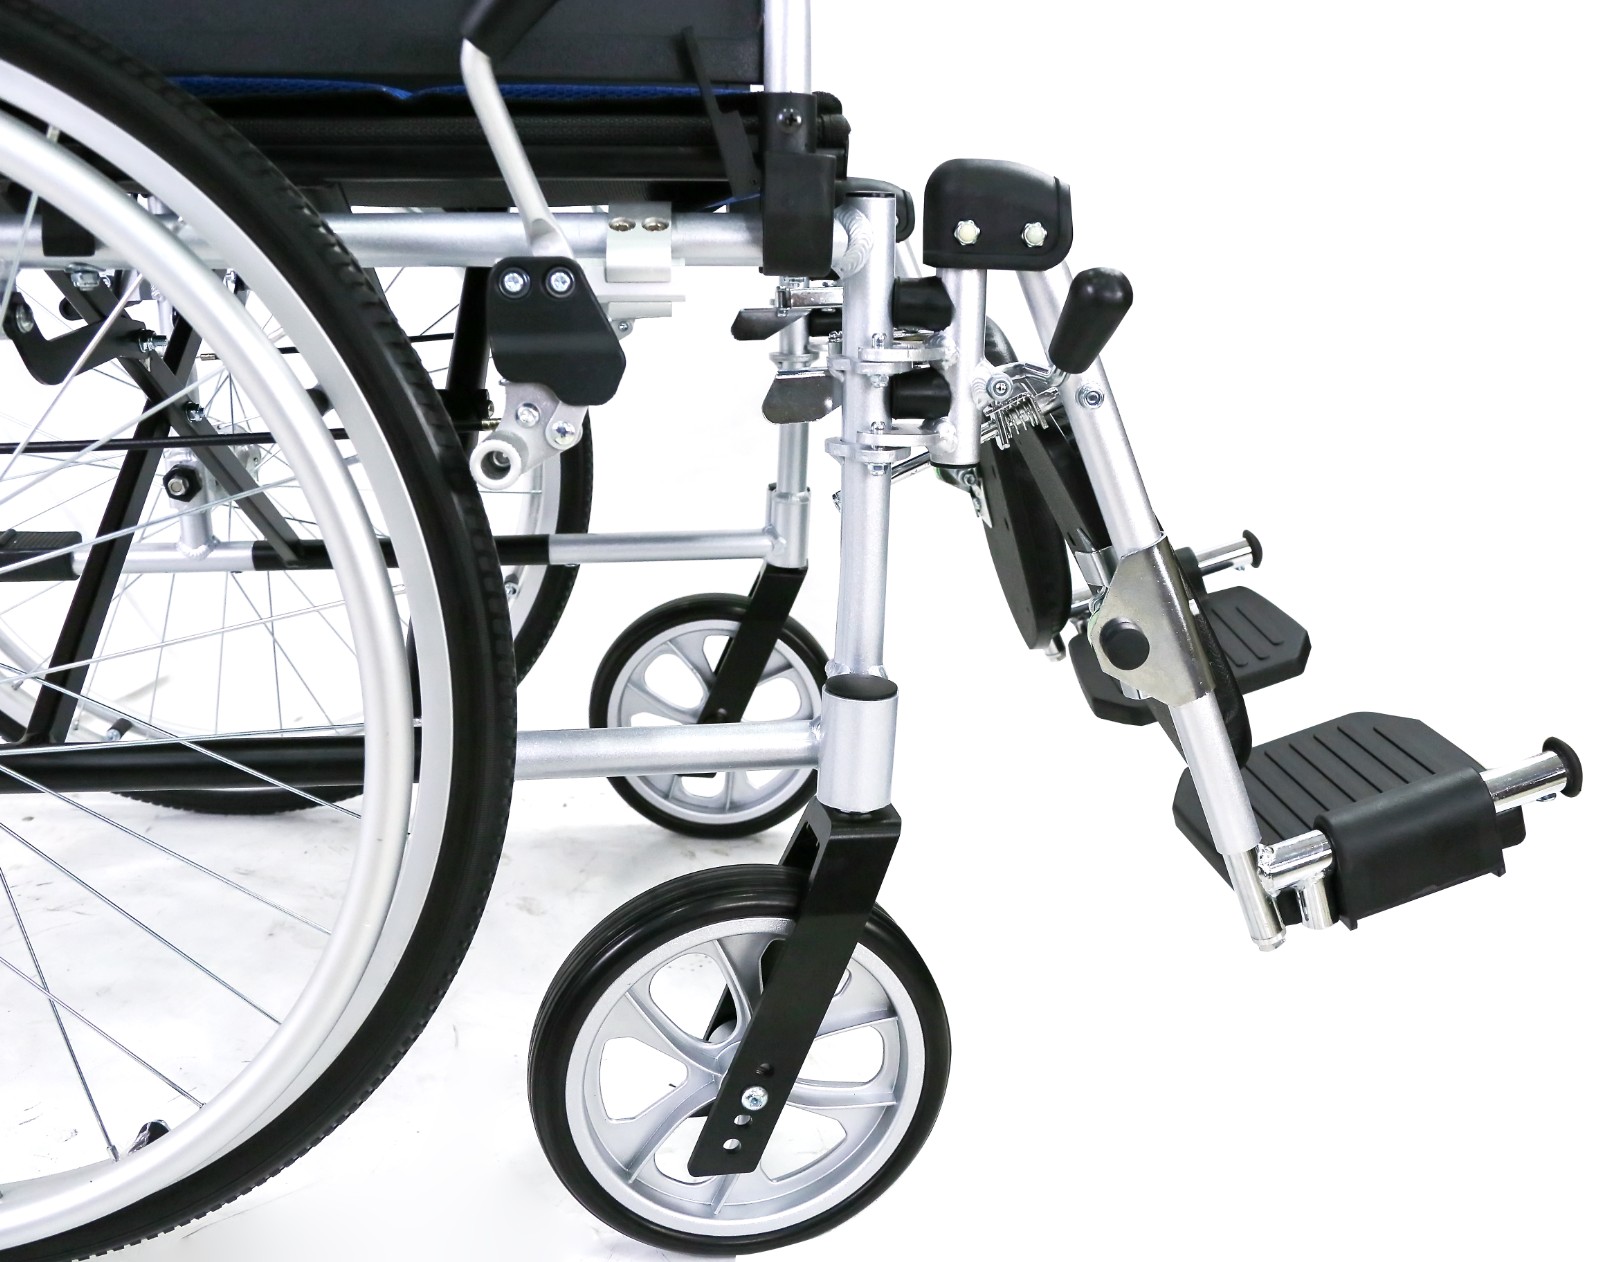 Light-weight Aluminum Functional Wheelchair with 22' solid rear wheel